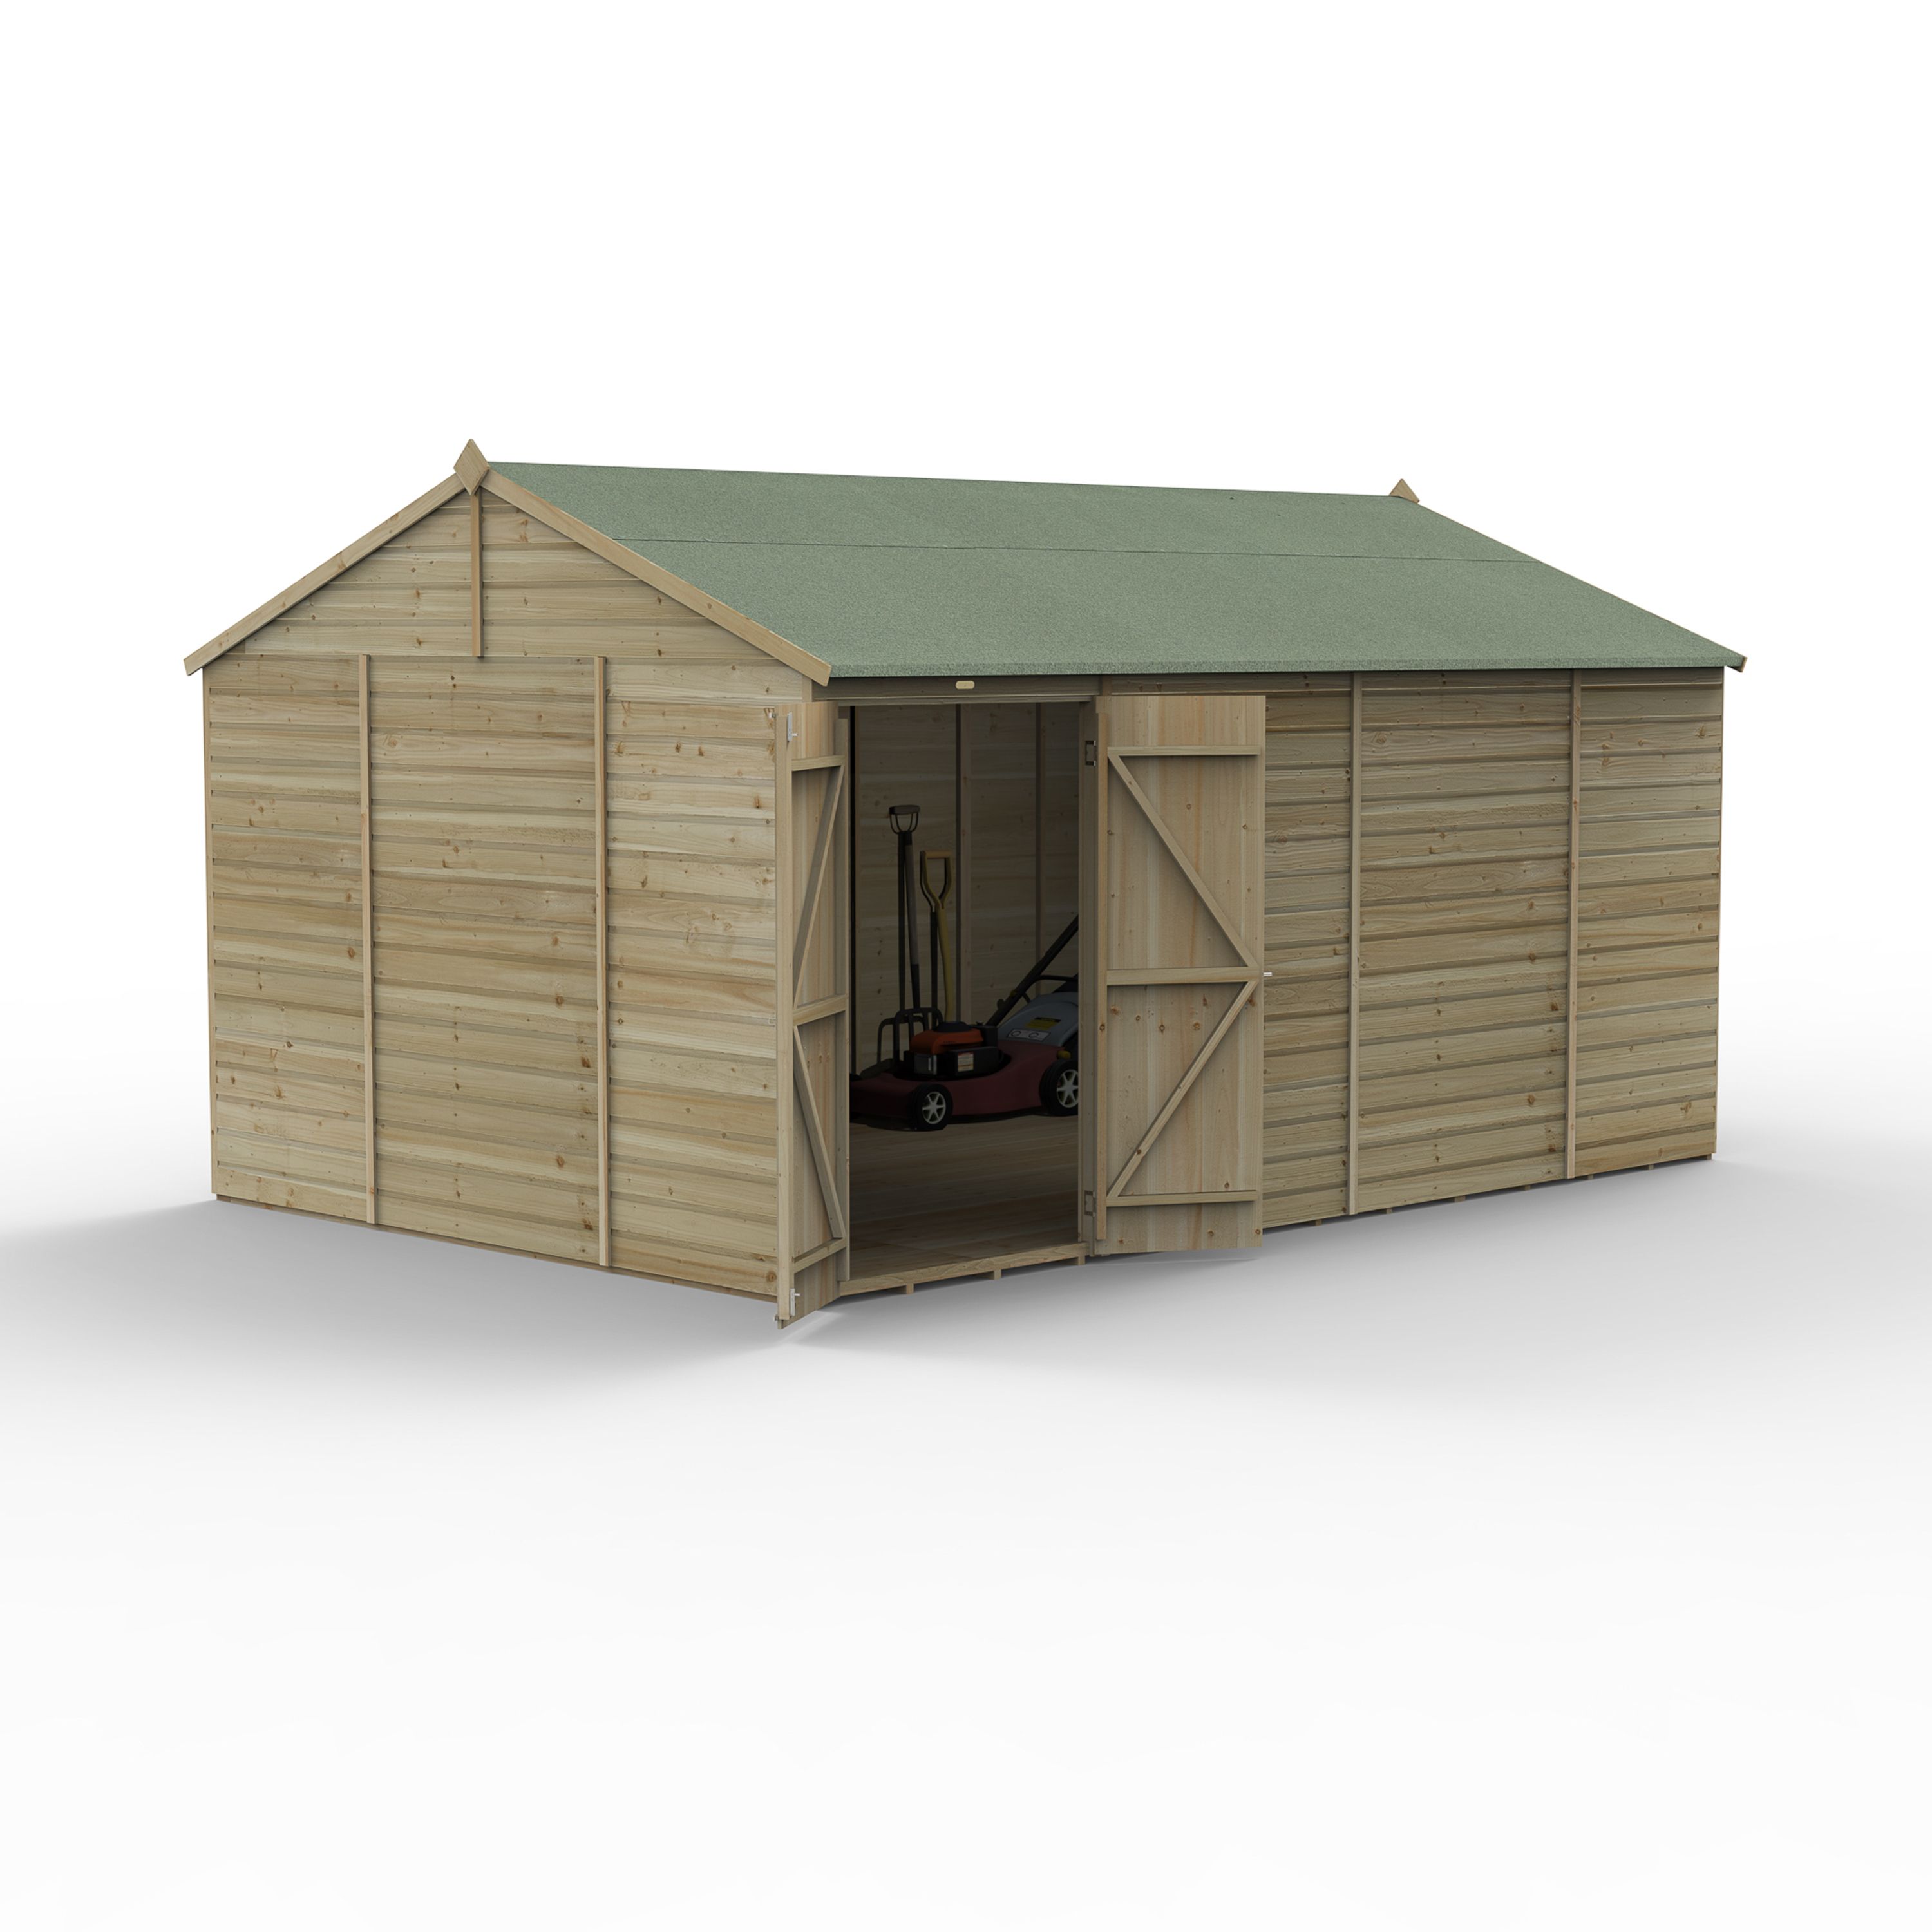 Forest Garden Beckwood 10x15 ft Reverse apex Natural timber Wooden 2 door Shed with floor (Base included)